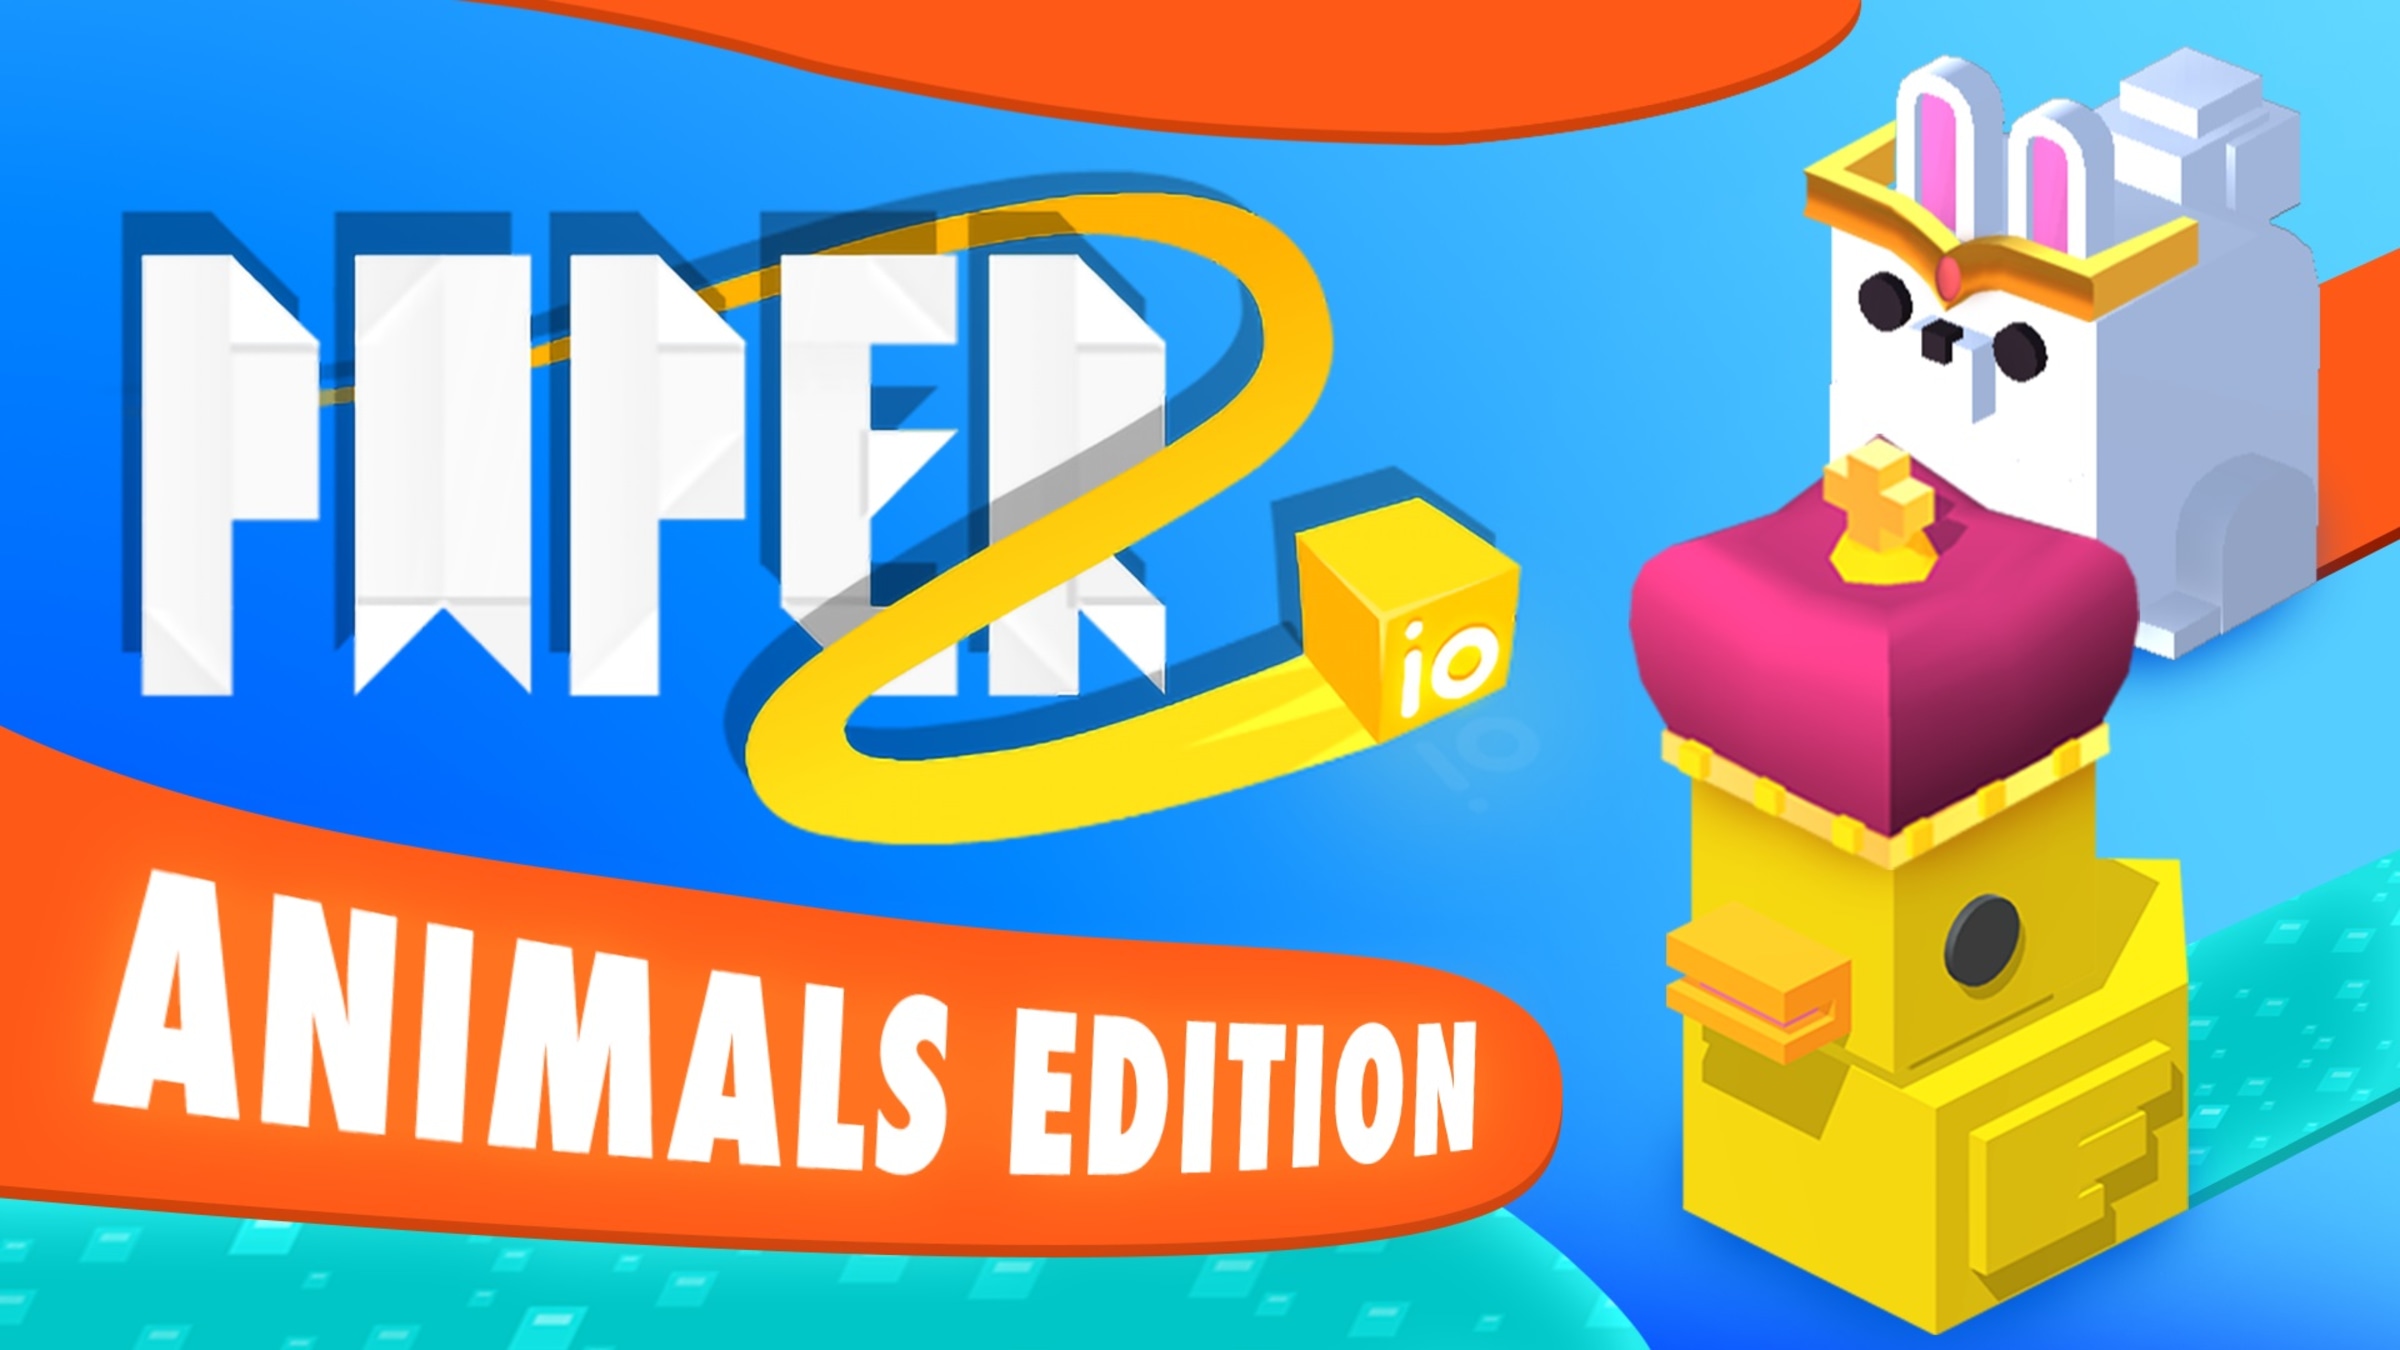 Paper io 2: Animals Edition for Nintendo Switch - Nintendo Official Site